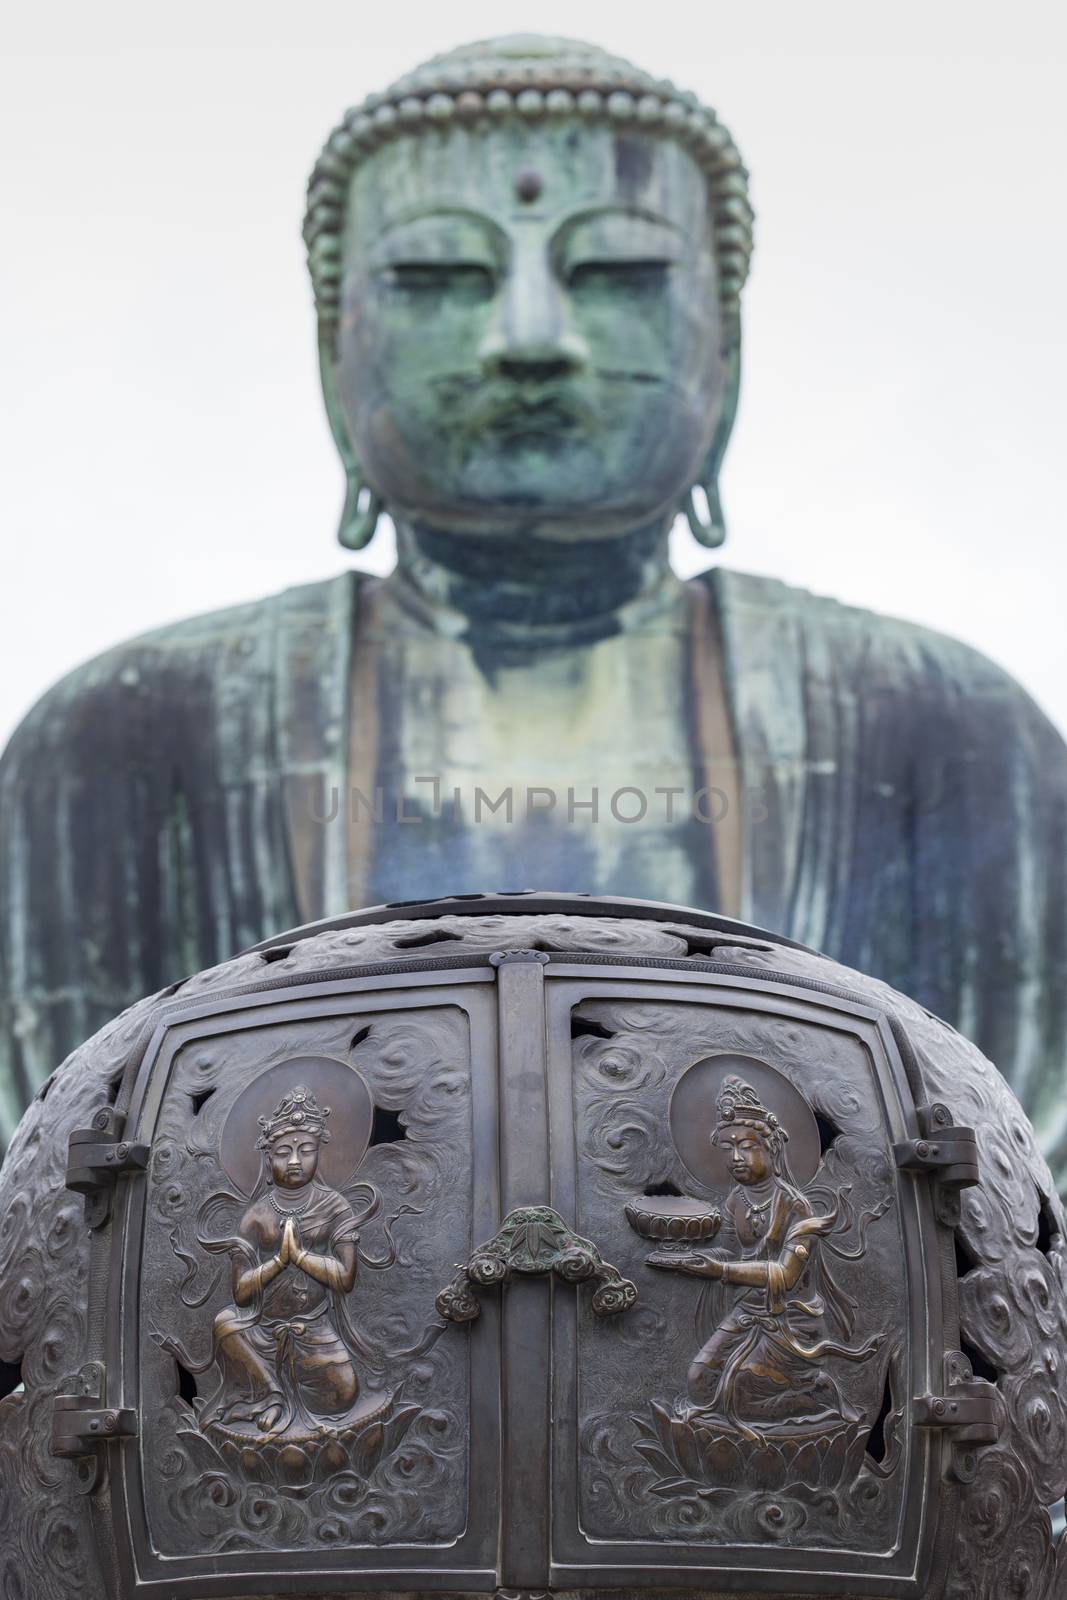 The Great Buddha (Daibutsu) on the grounds of Kotokuin Temple in by mariusz_prusaczyk